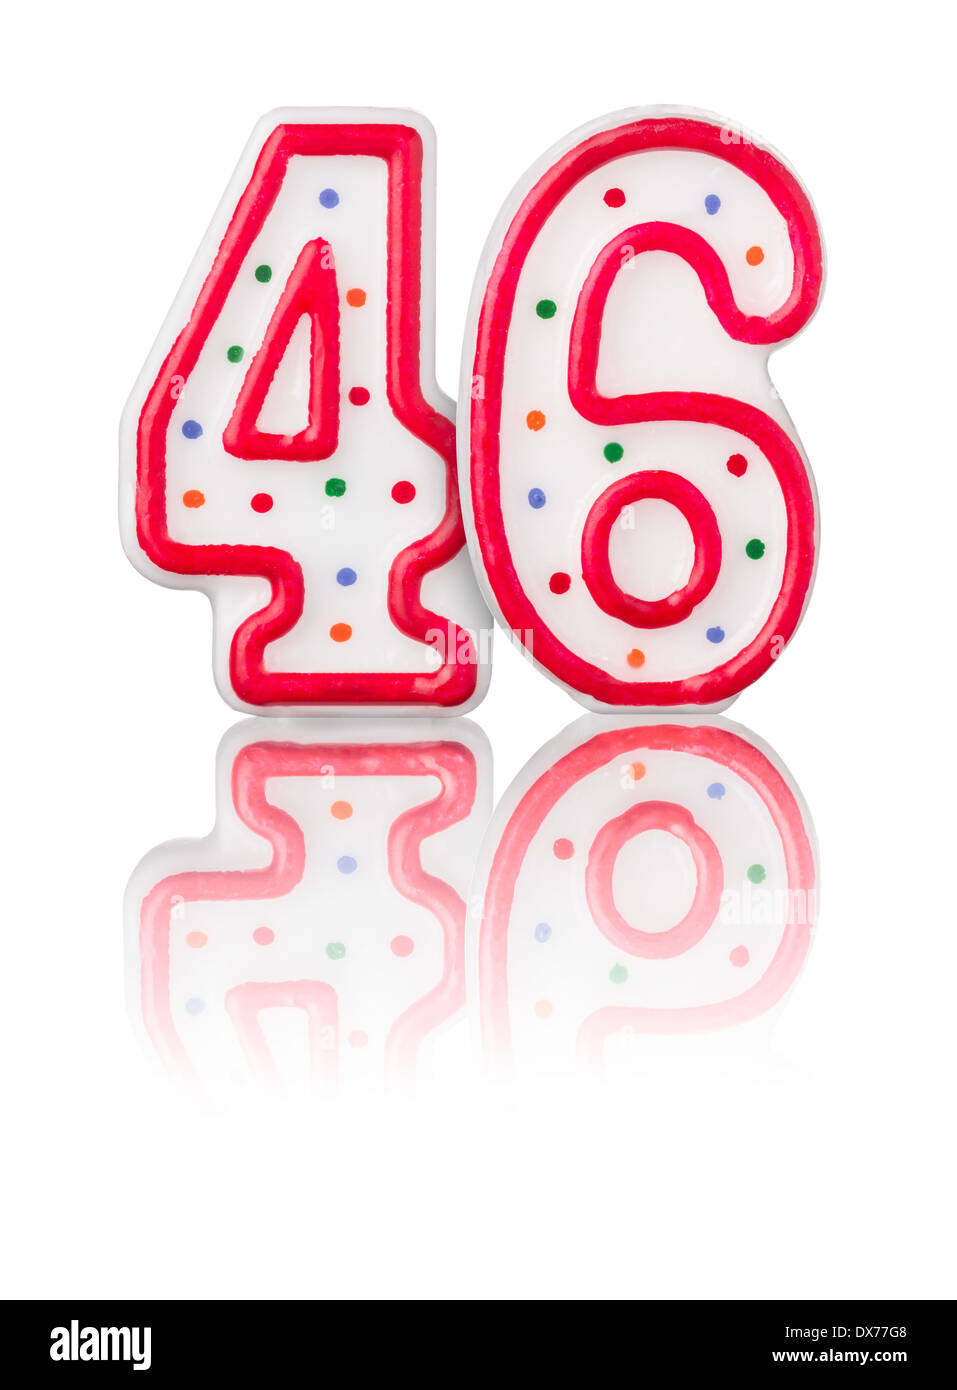 Red number 46 with reflection on a white background Stock Photo